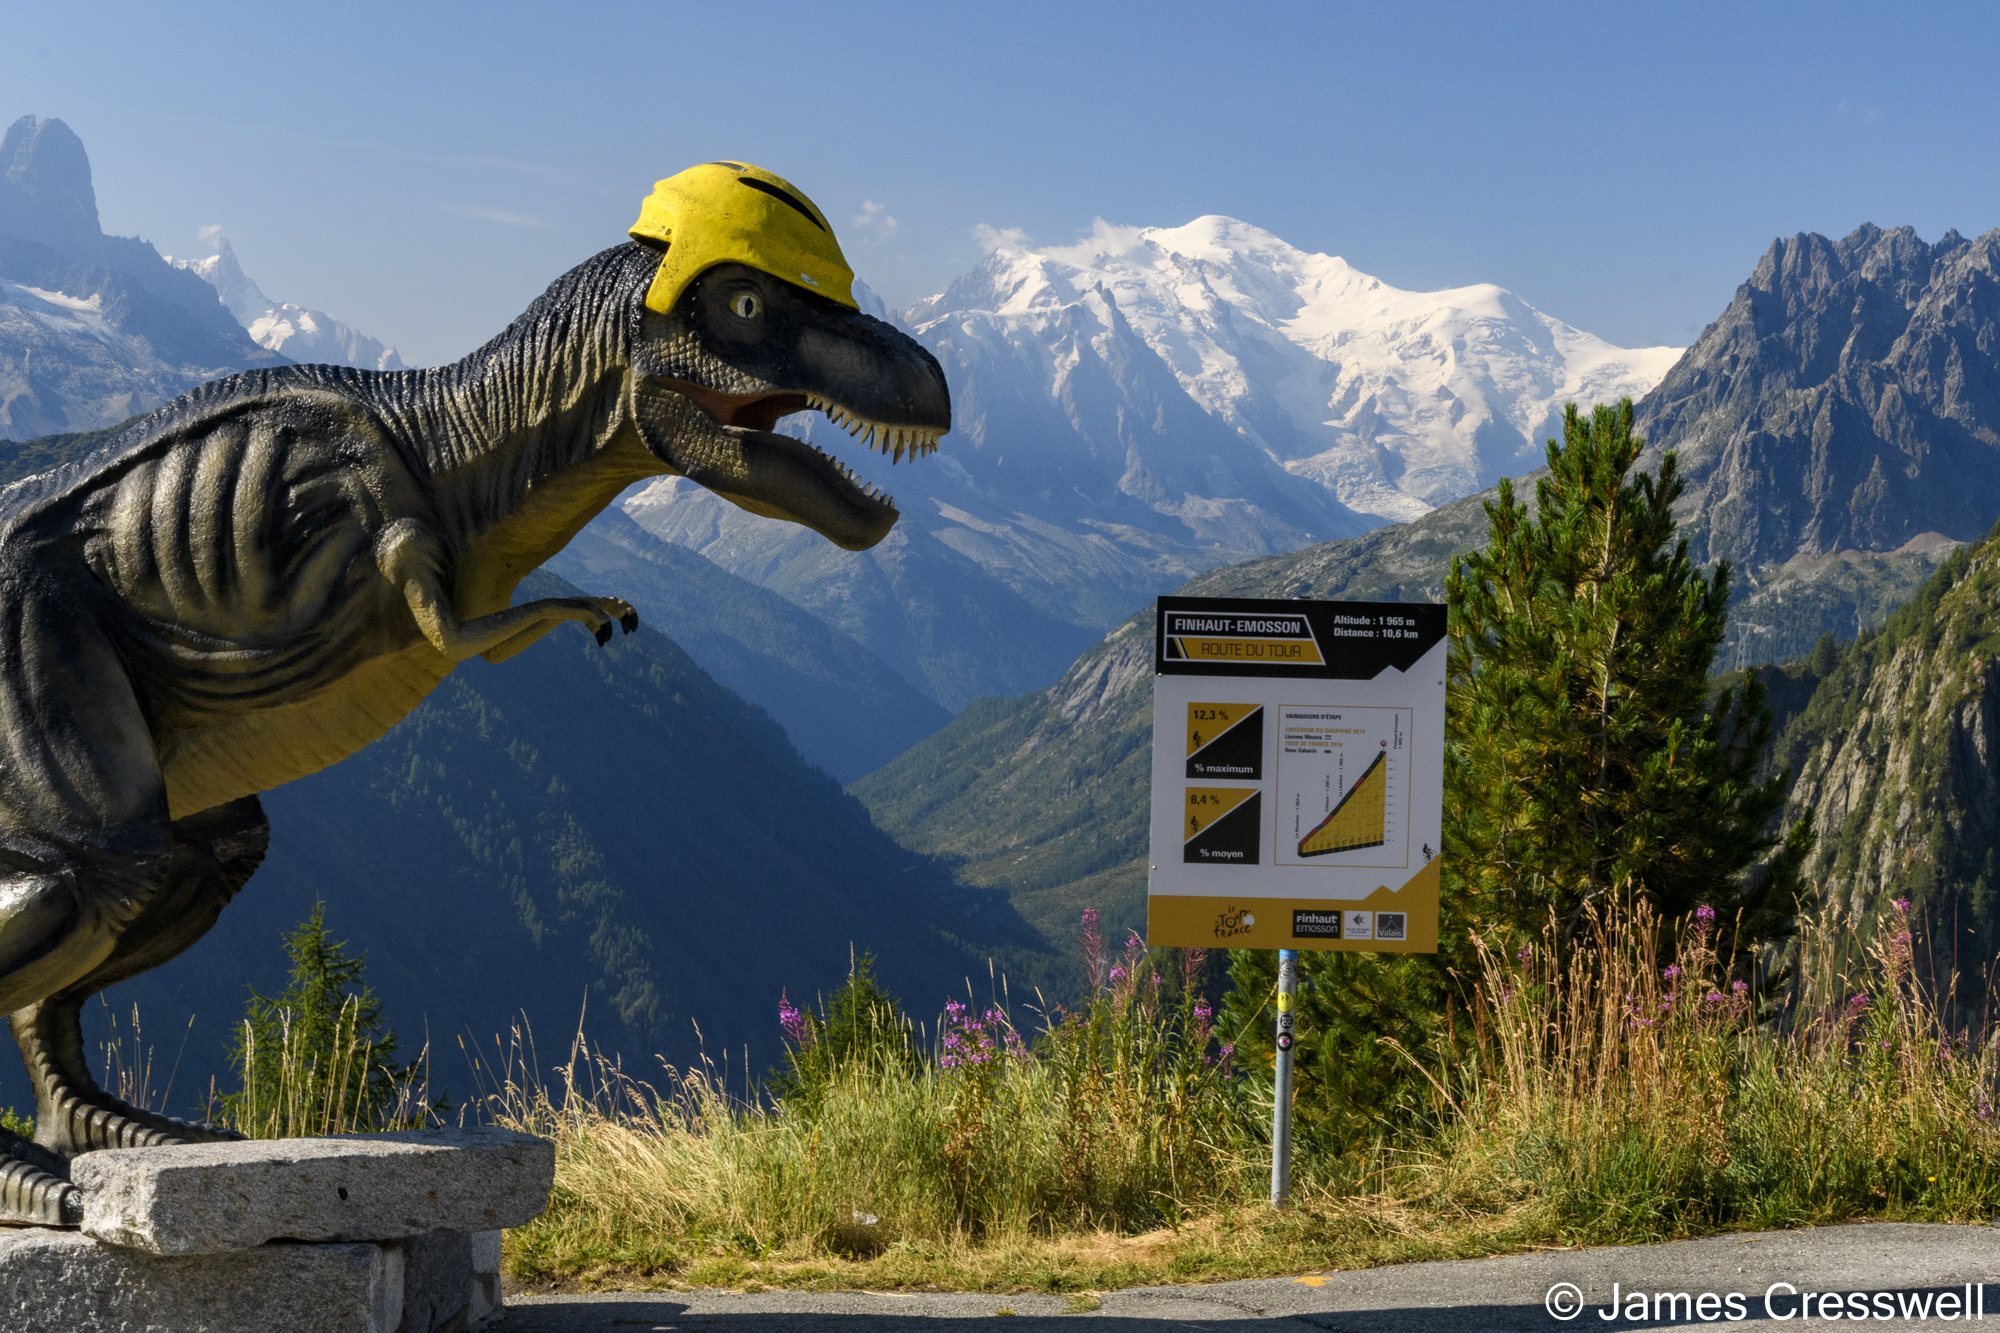 Dinosaur model wearing a cycle helmet with mountains in the background